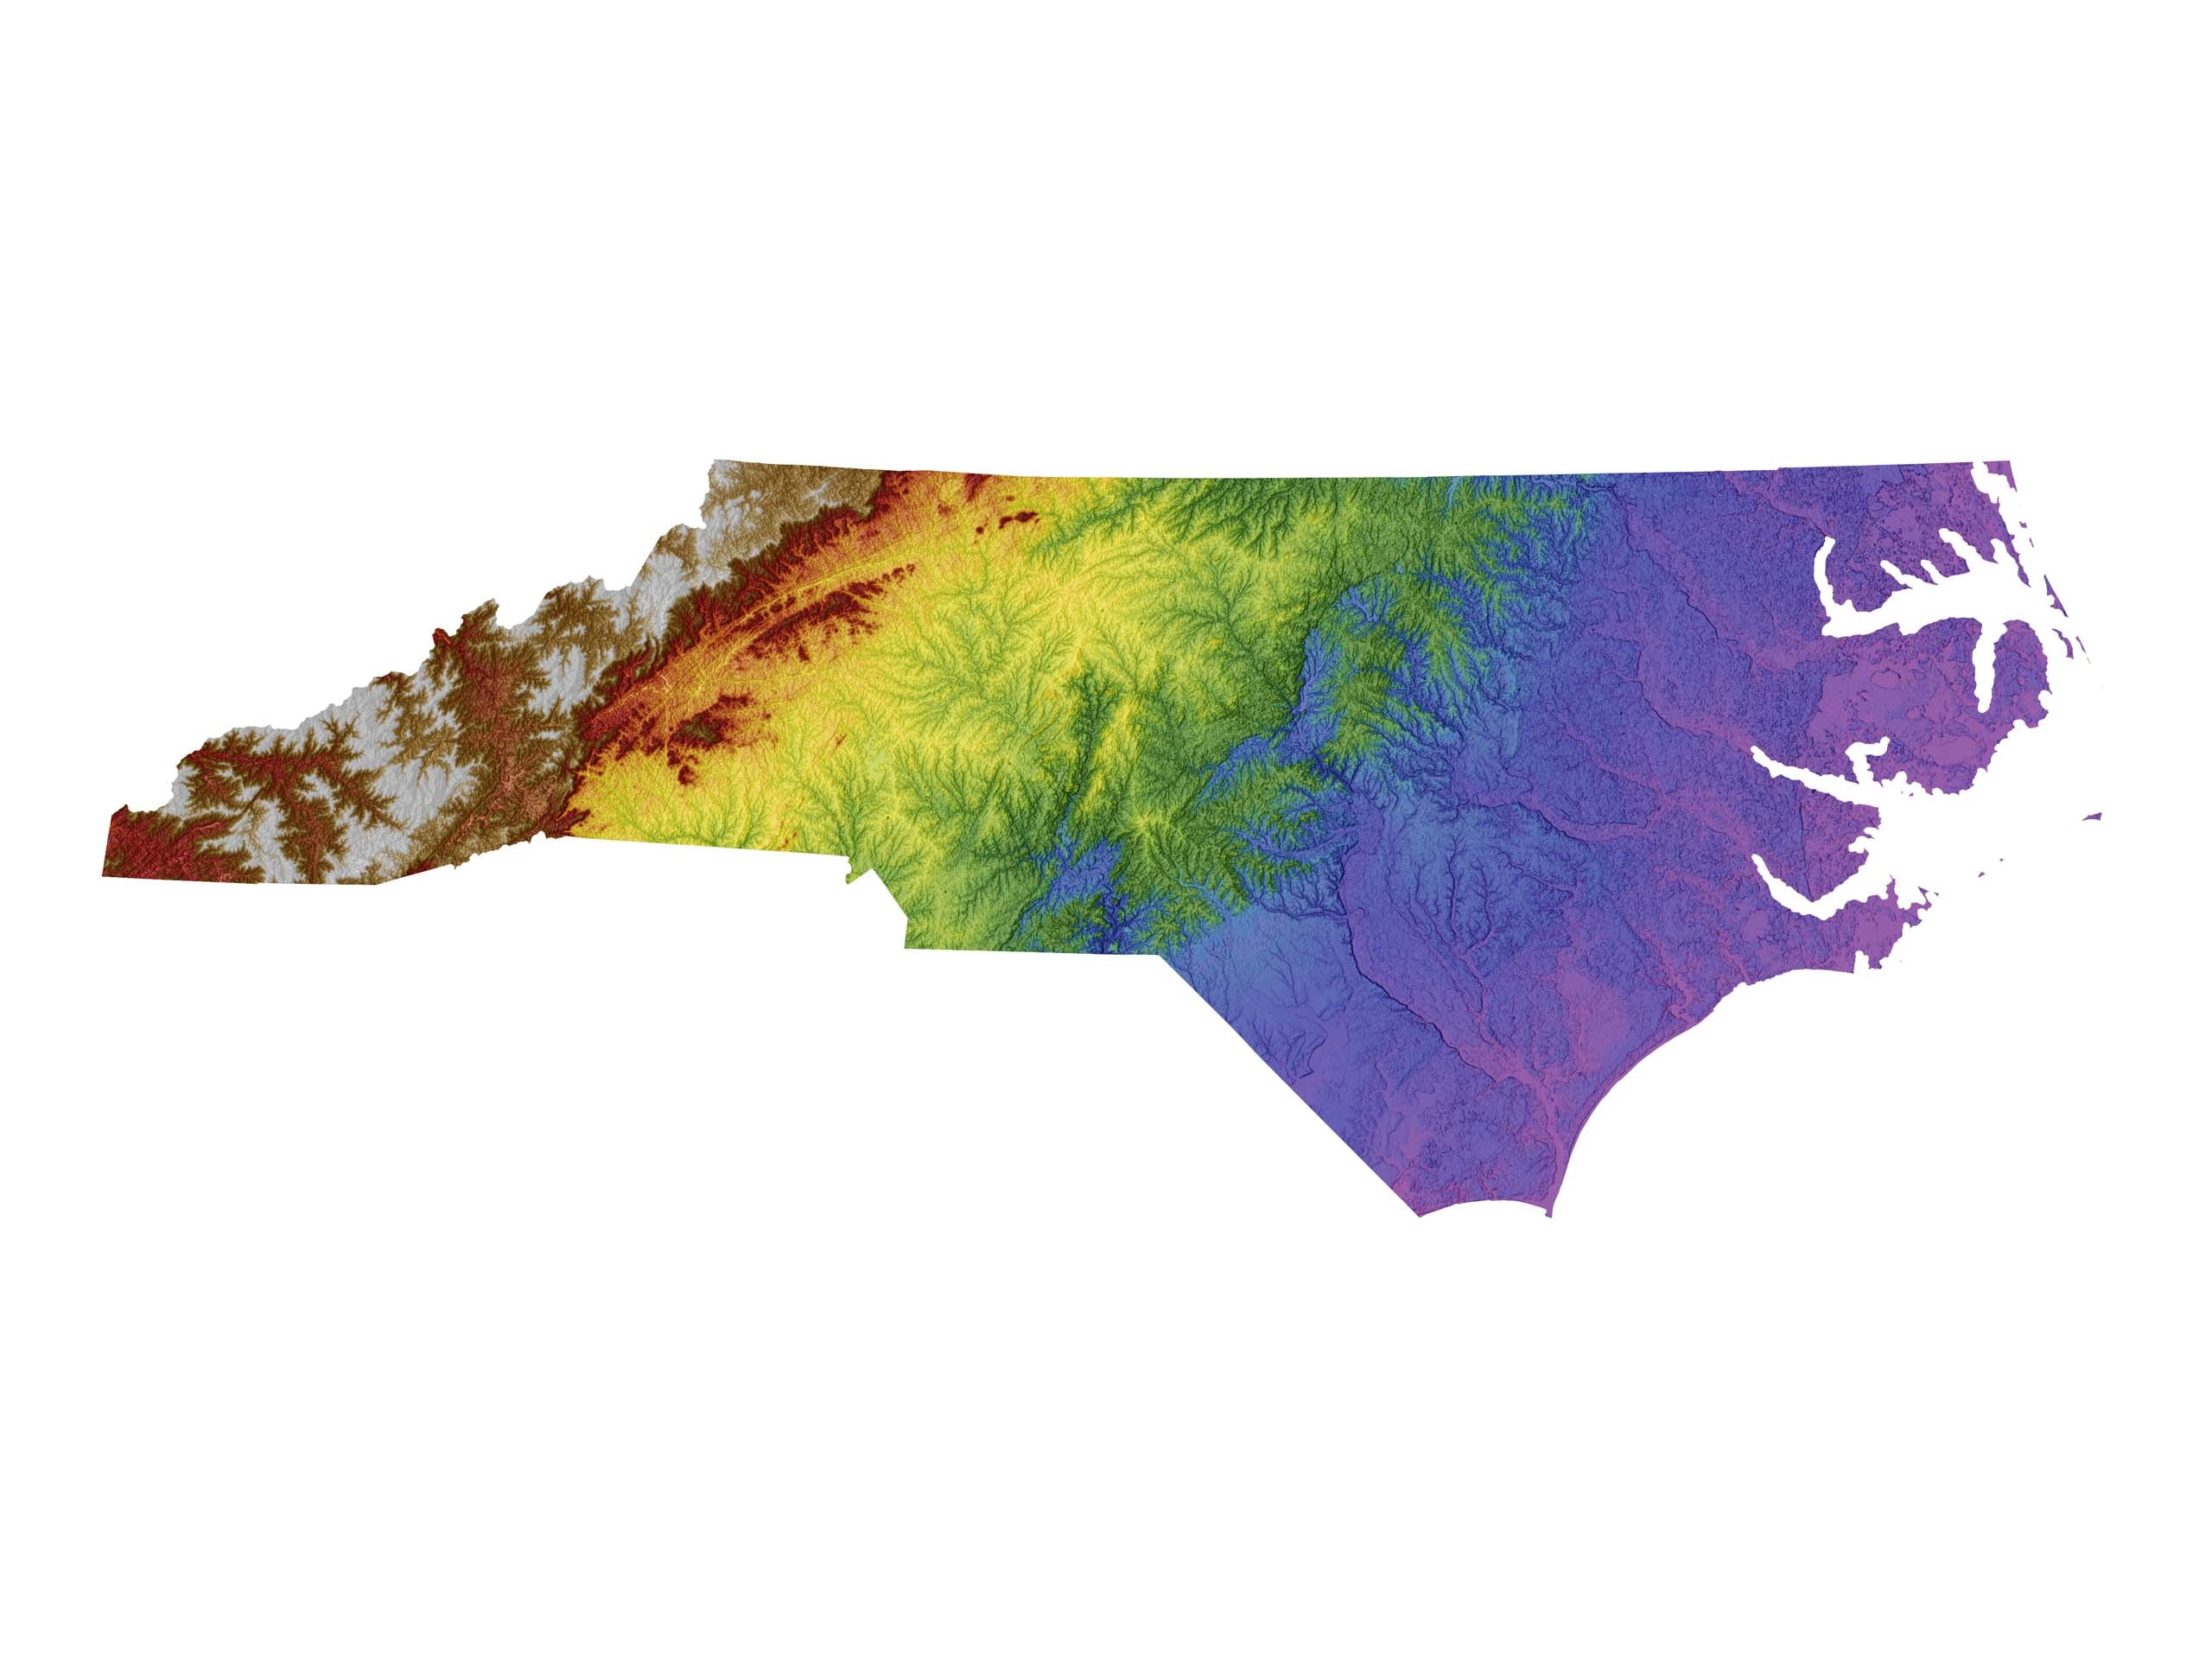 North Carolina Color Elevation Map Wall Art Poster Print With White Background